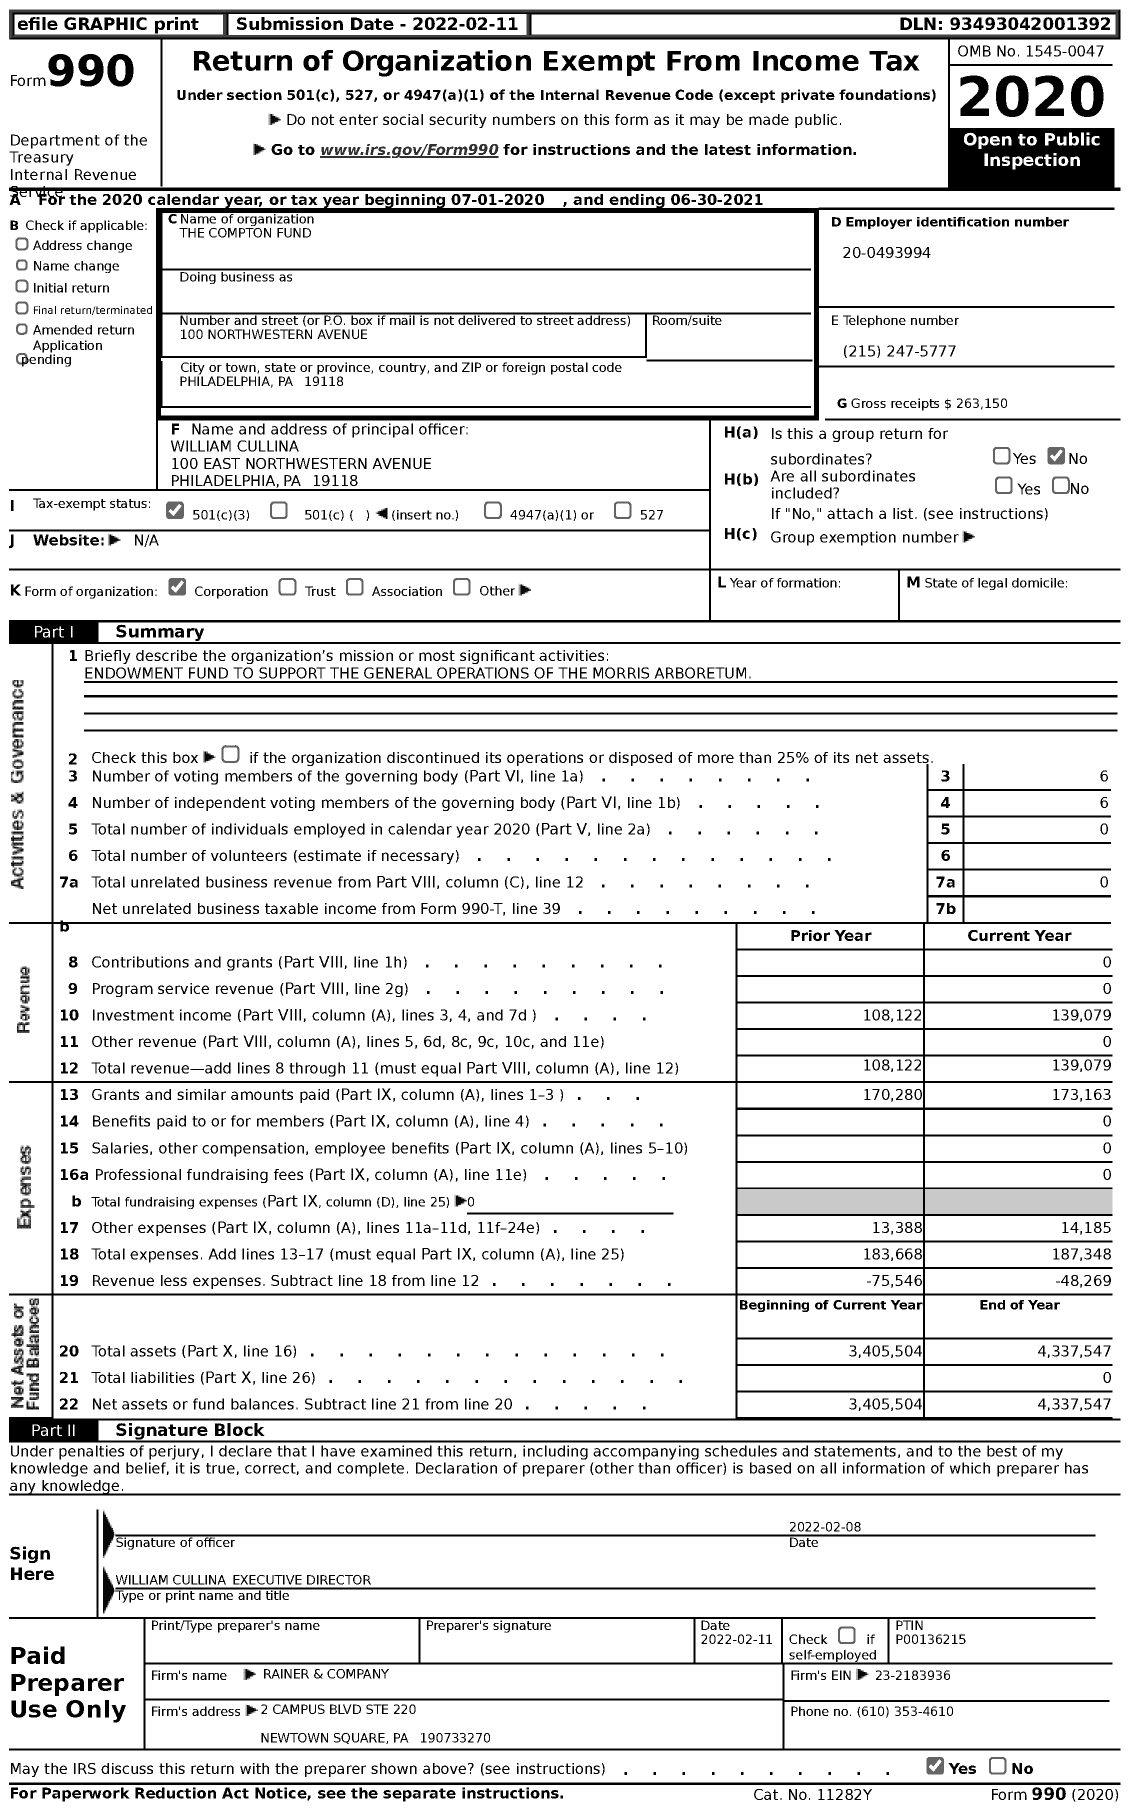 Image of first page of 2020 Form 990 for The Compton Fund